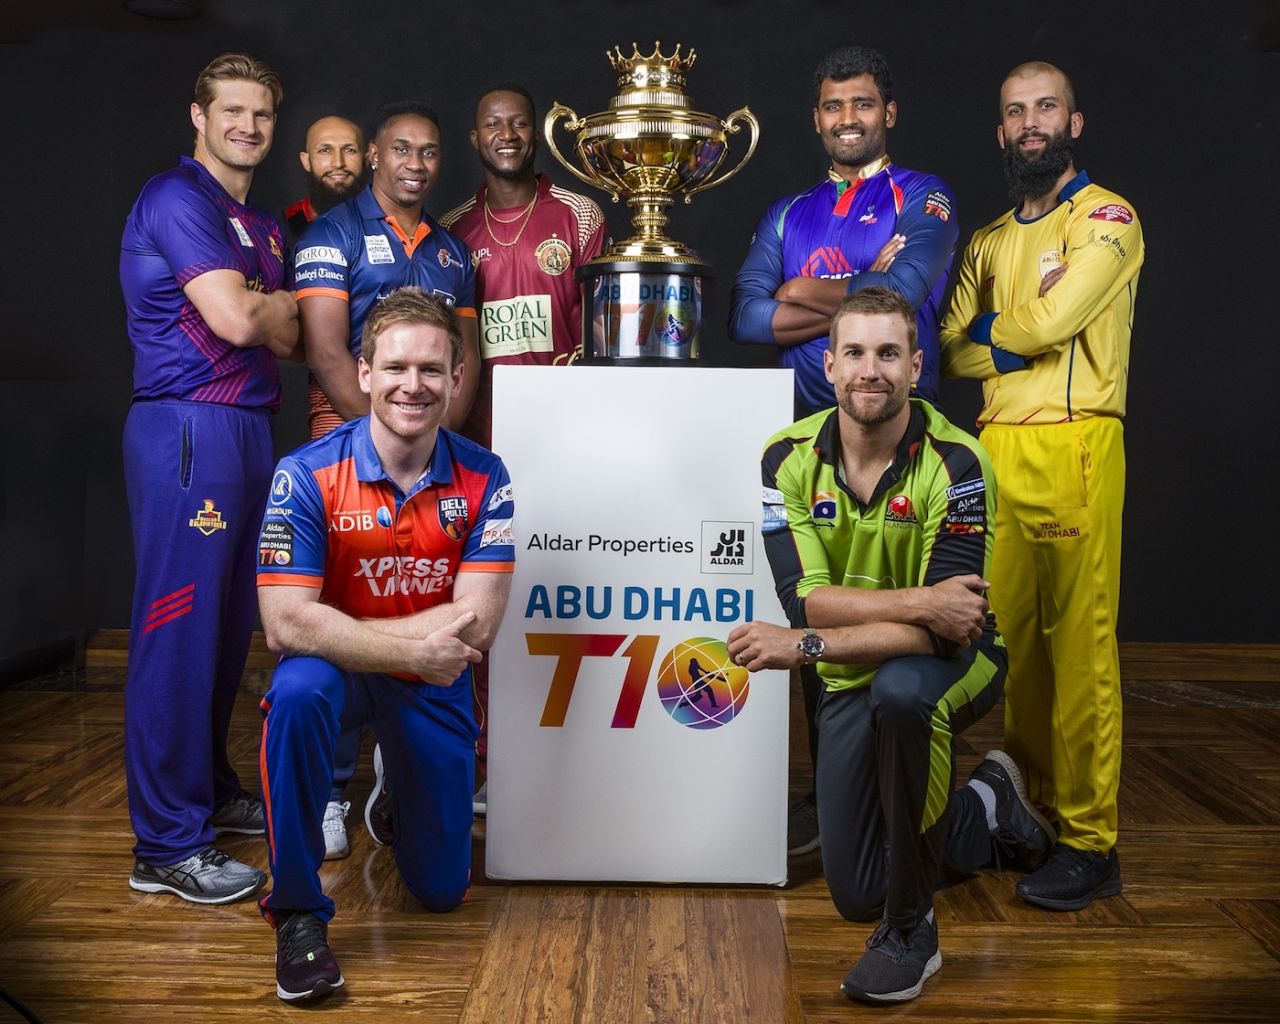 The eight captains pose after arriving for T10, Abu Dhabi, November 14, 2019